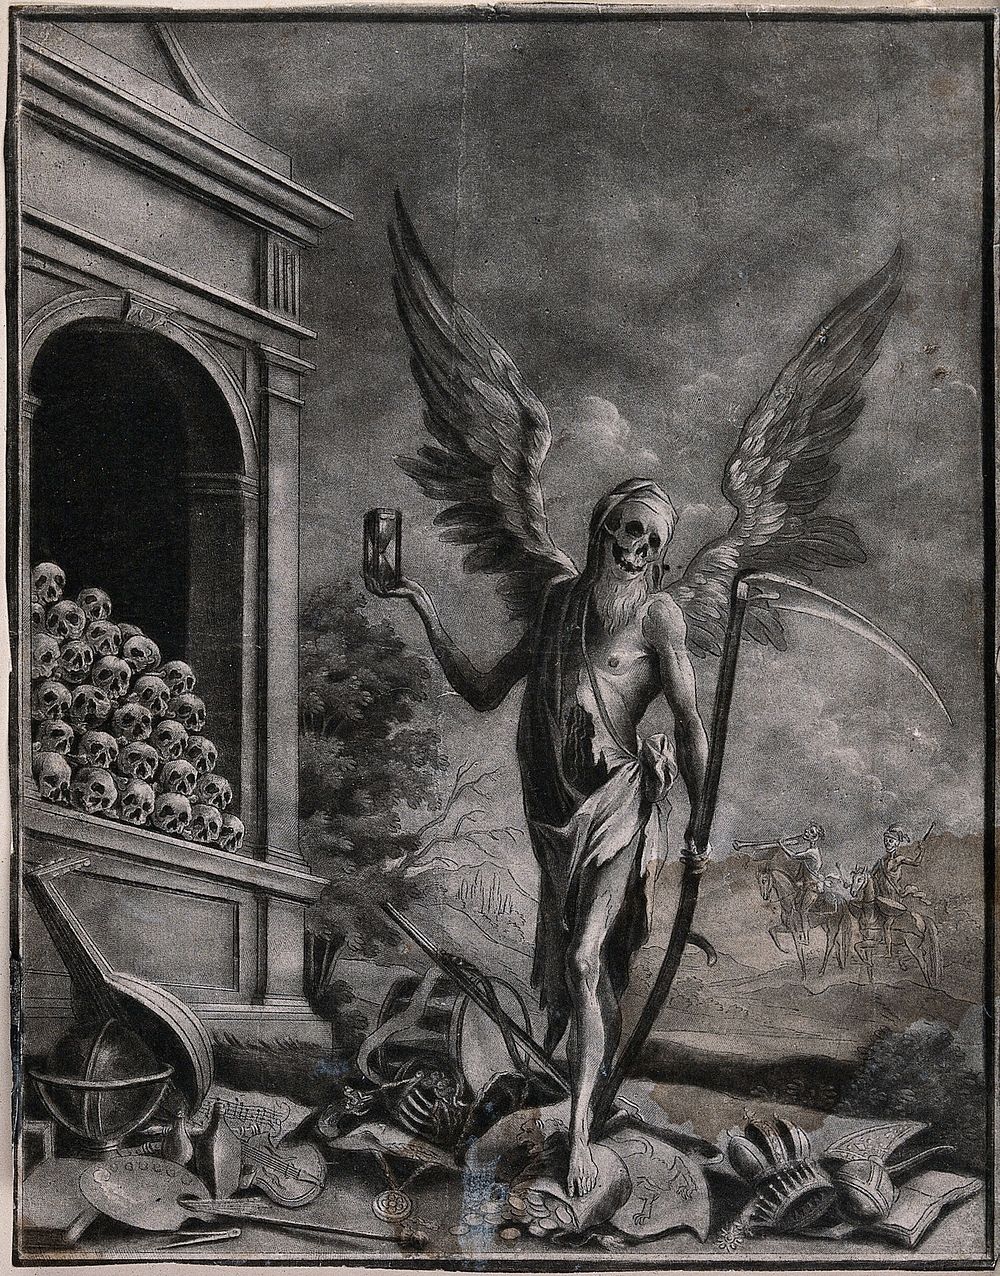 A winged figure of Death stands on top of a selection of worldly goods and holds an hourglass and a scythe. Mezzotint.